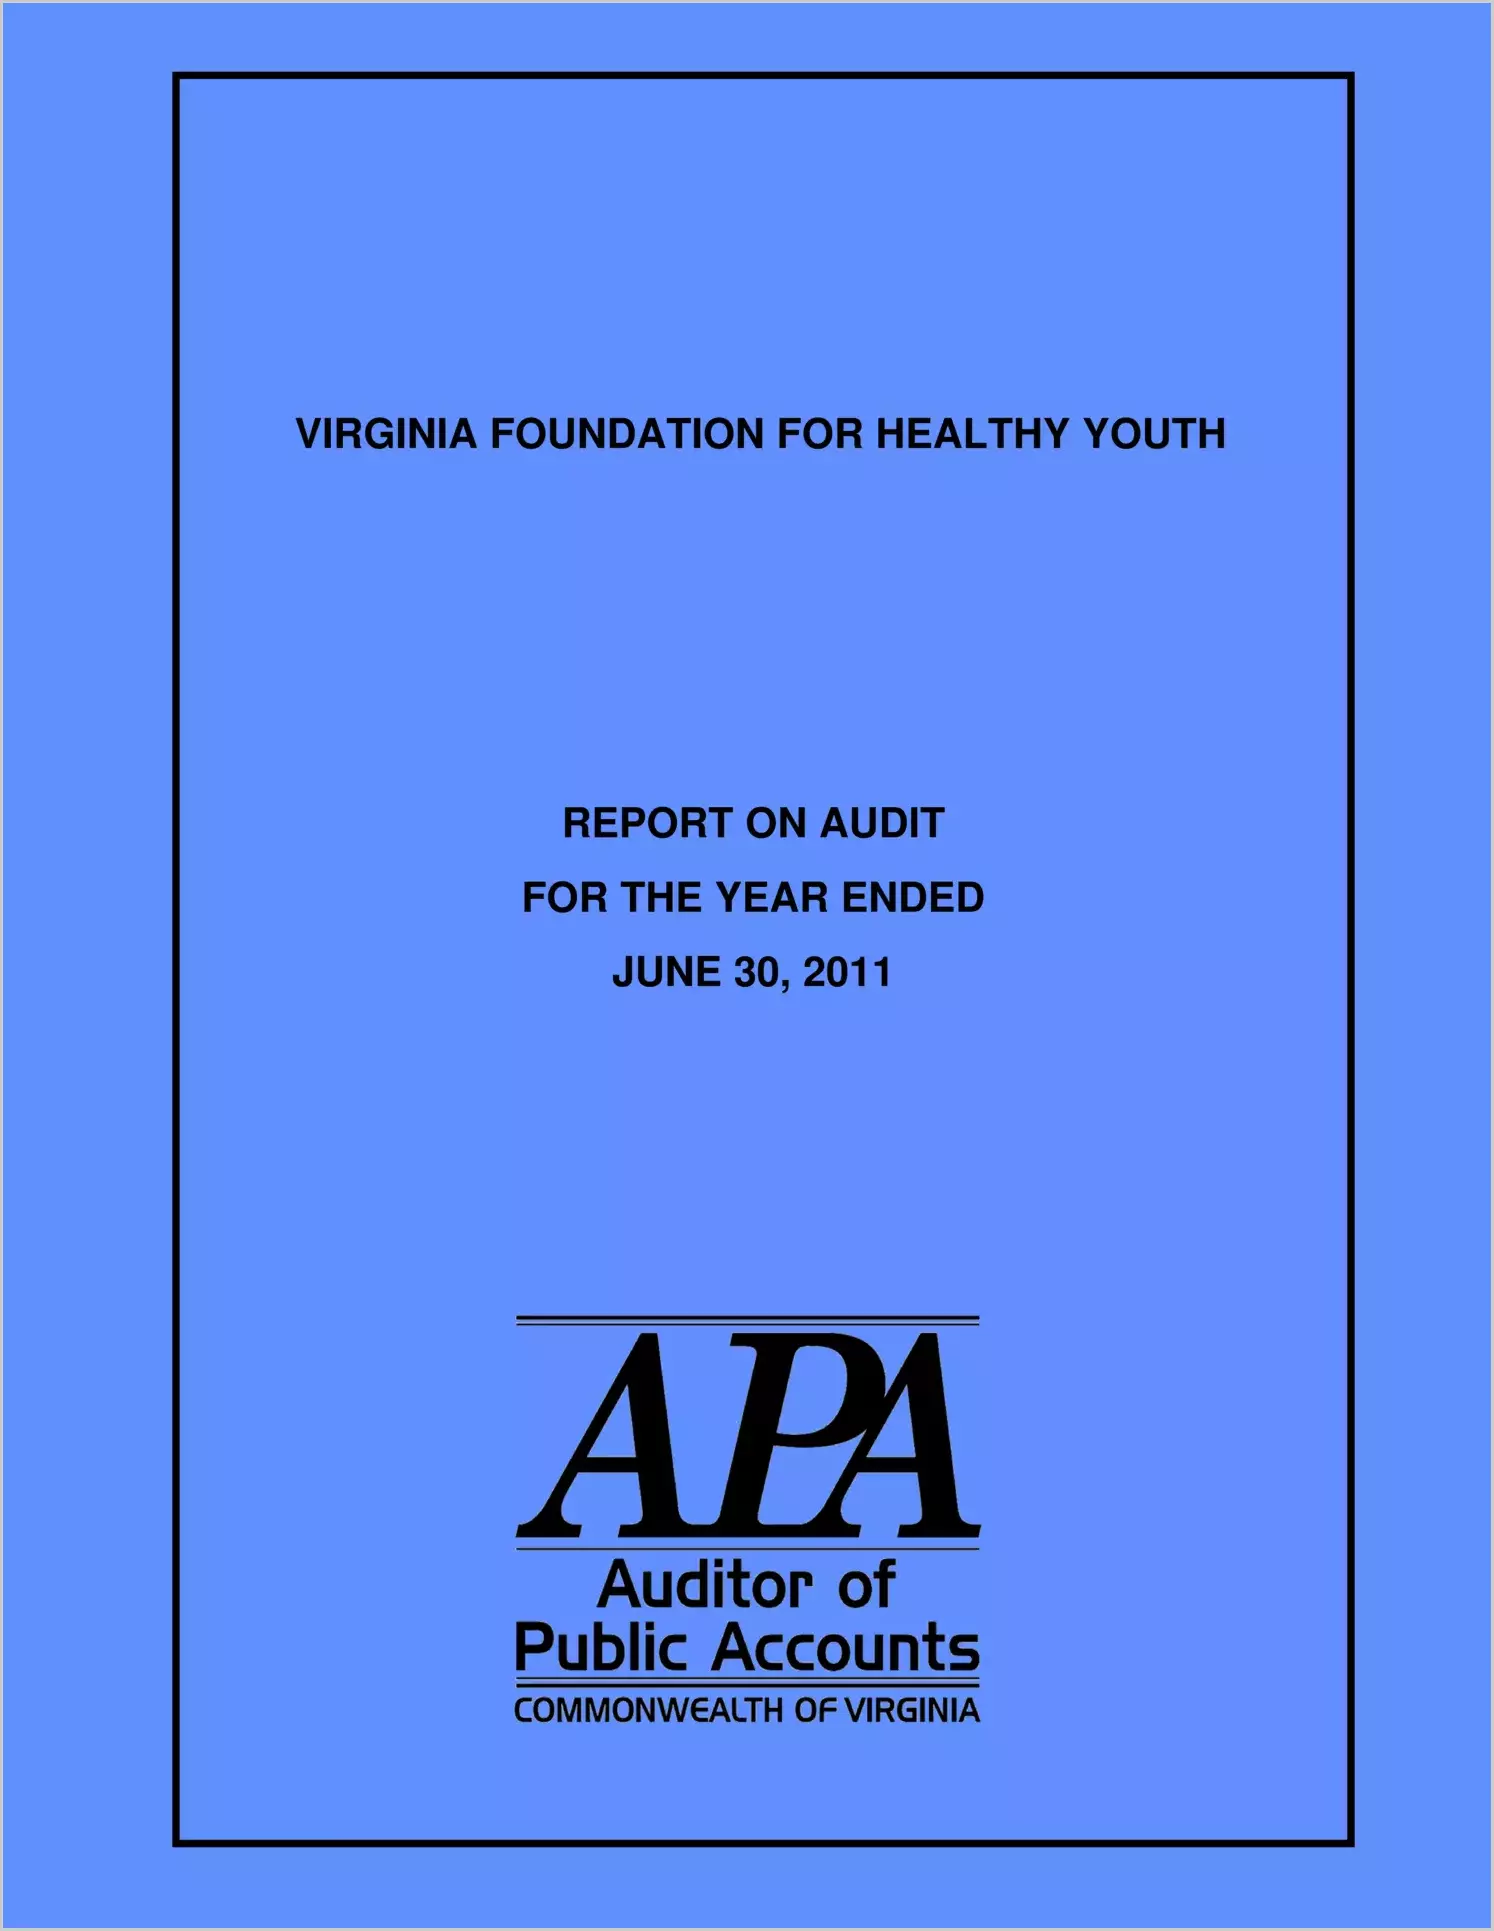 Foundation for Healthy Youth for the year ended June 30, 2011